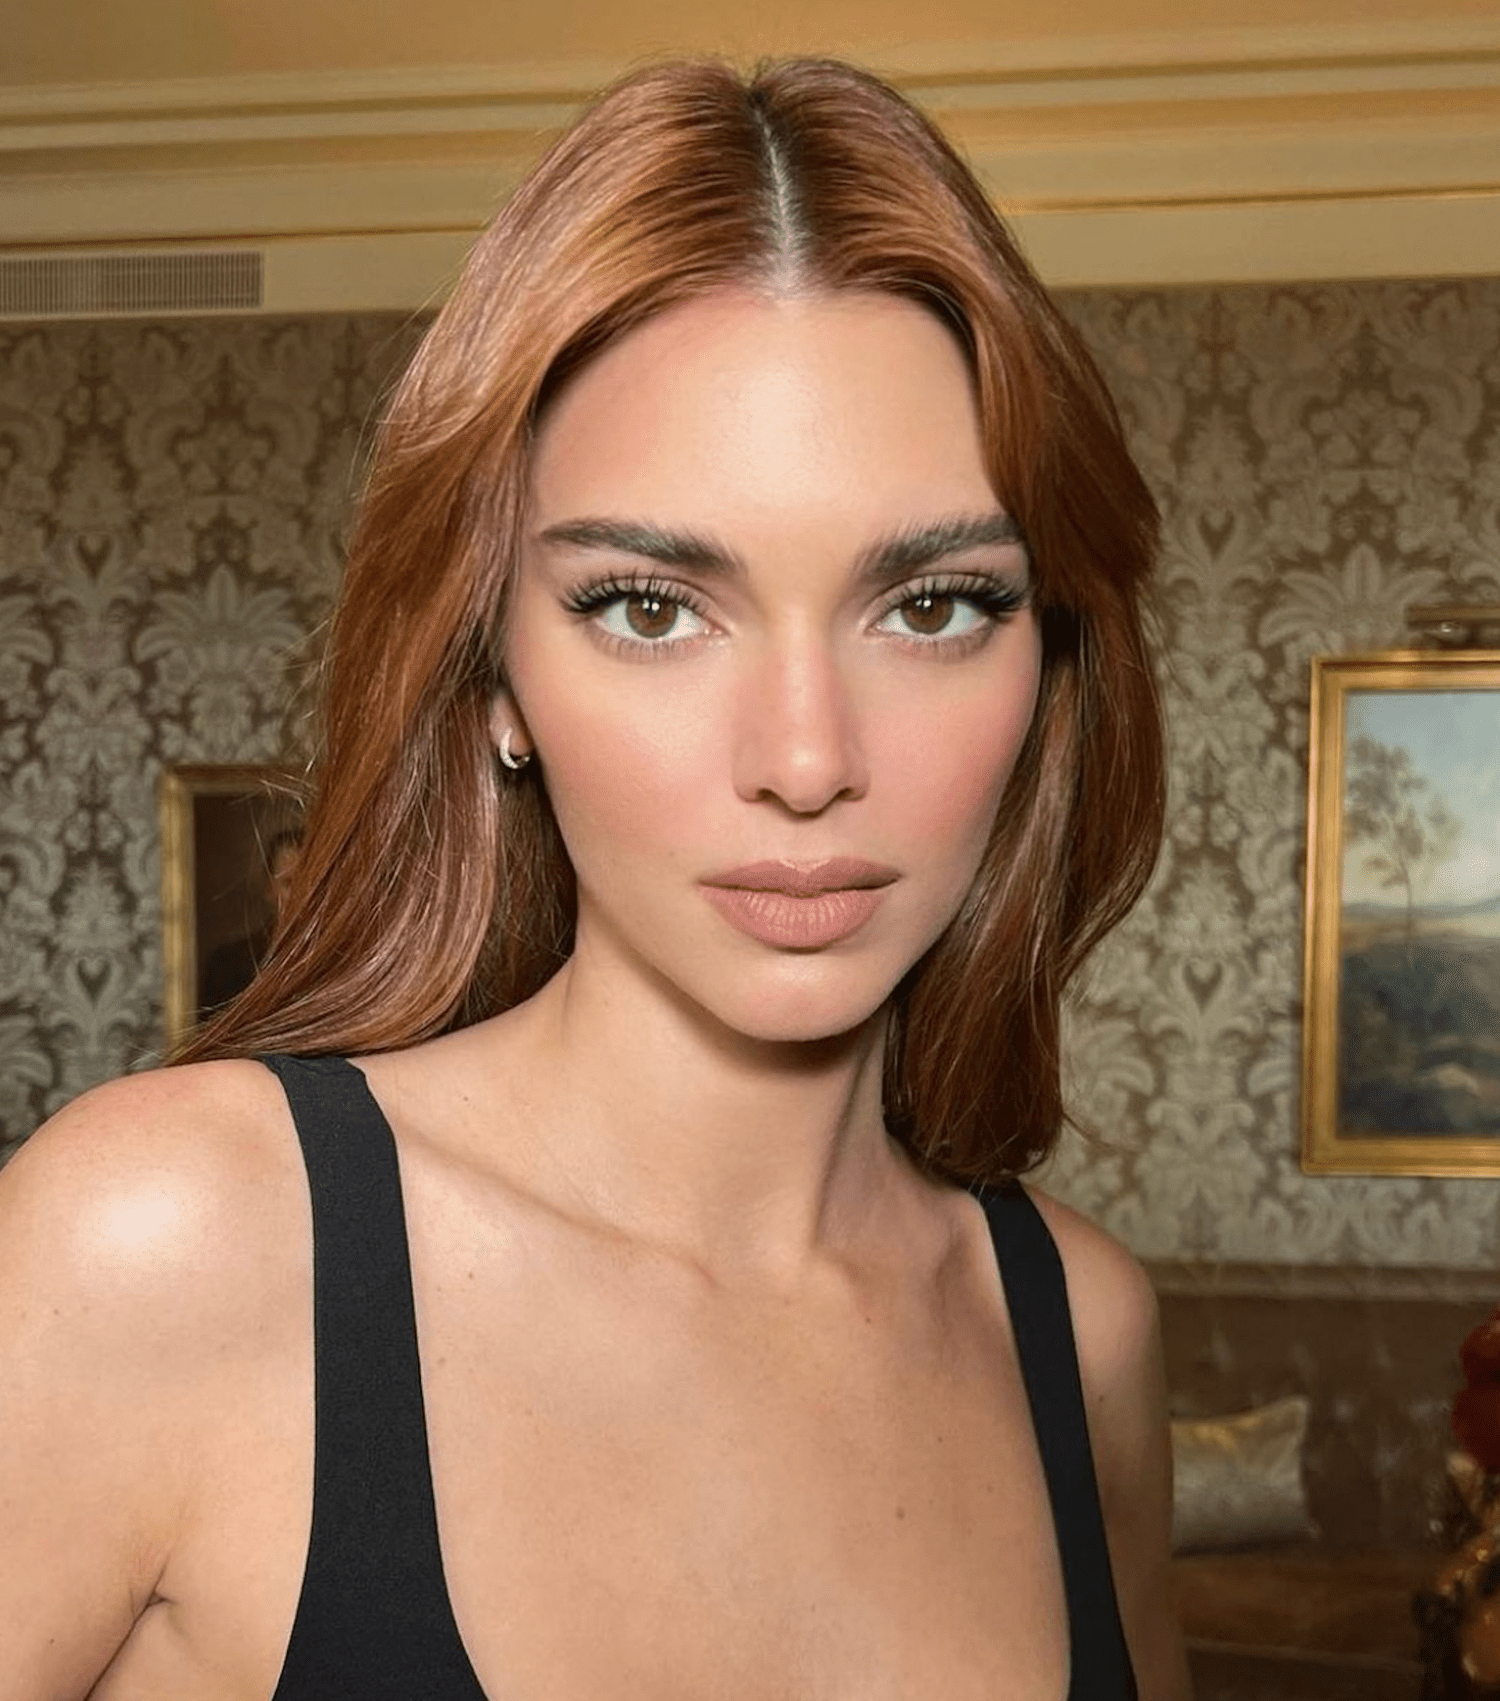 Kendall Jenner wears minimal muted makeup and a center part on her copper colored hair